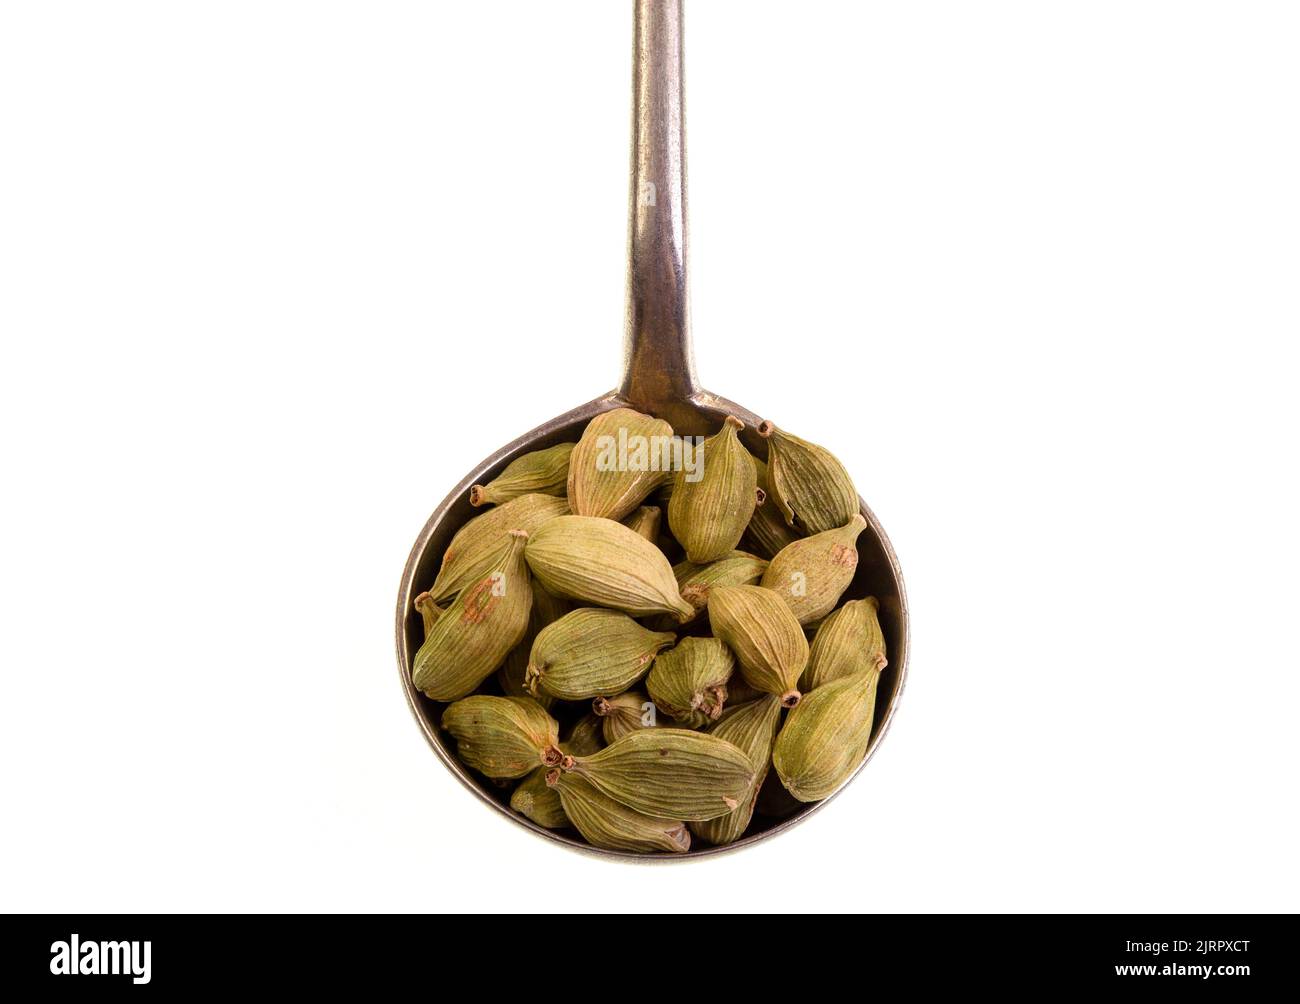 Cardamom is a spice made from the seeds of plants in the genera Elettaria, family Zingiberaceae, native of the Indian subcontinent and Indonesia. Stock Photo